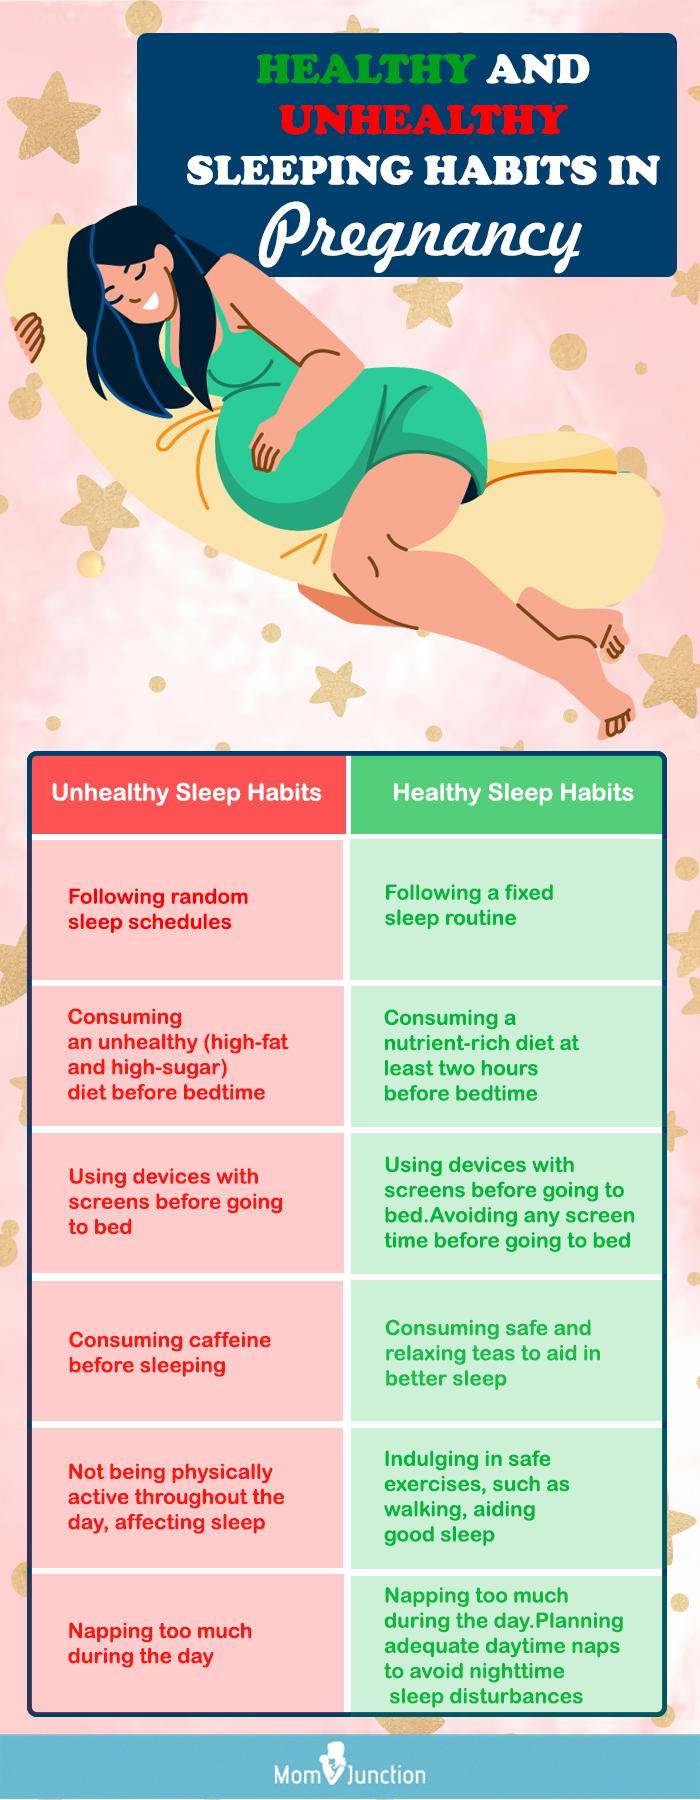 healthy and unhealthy sleeping habits in pregnancy (infographic)